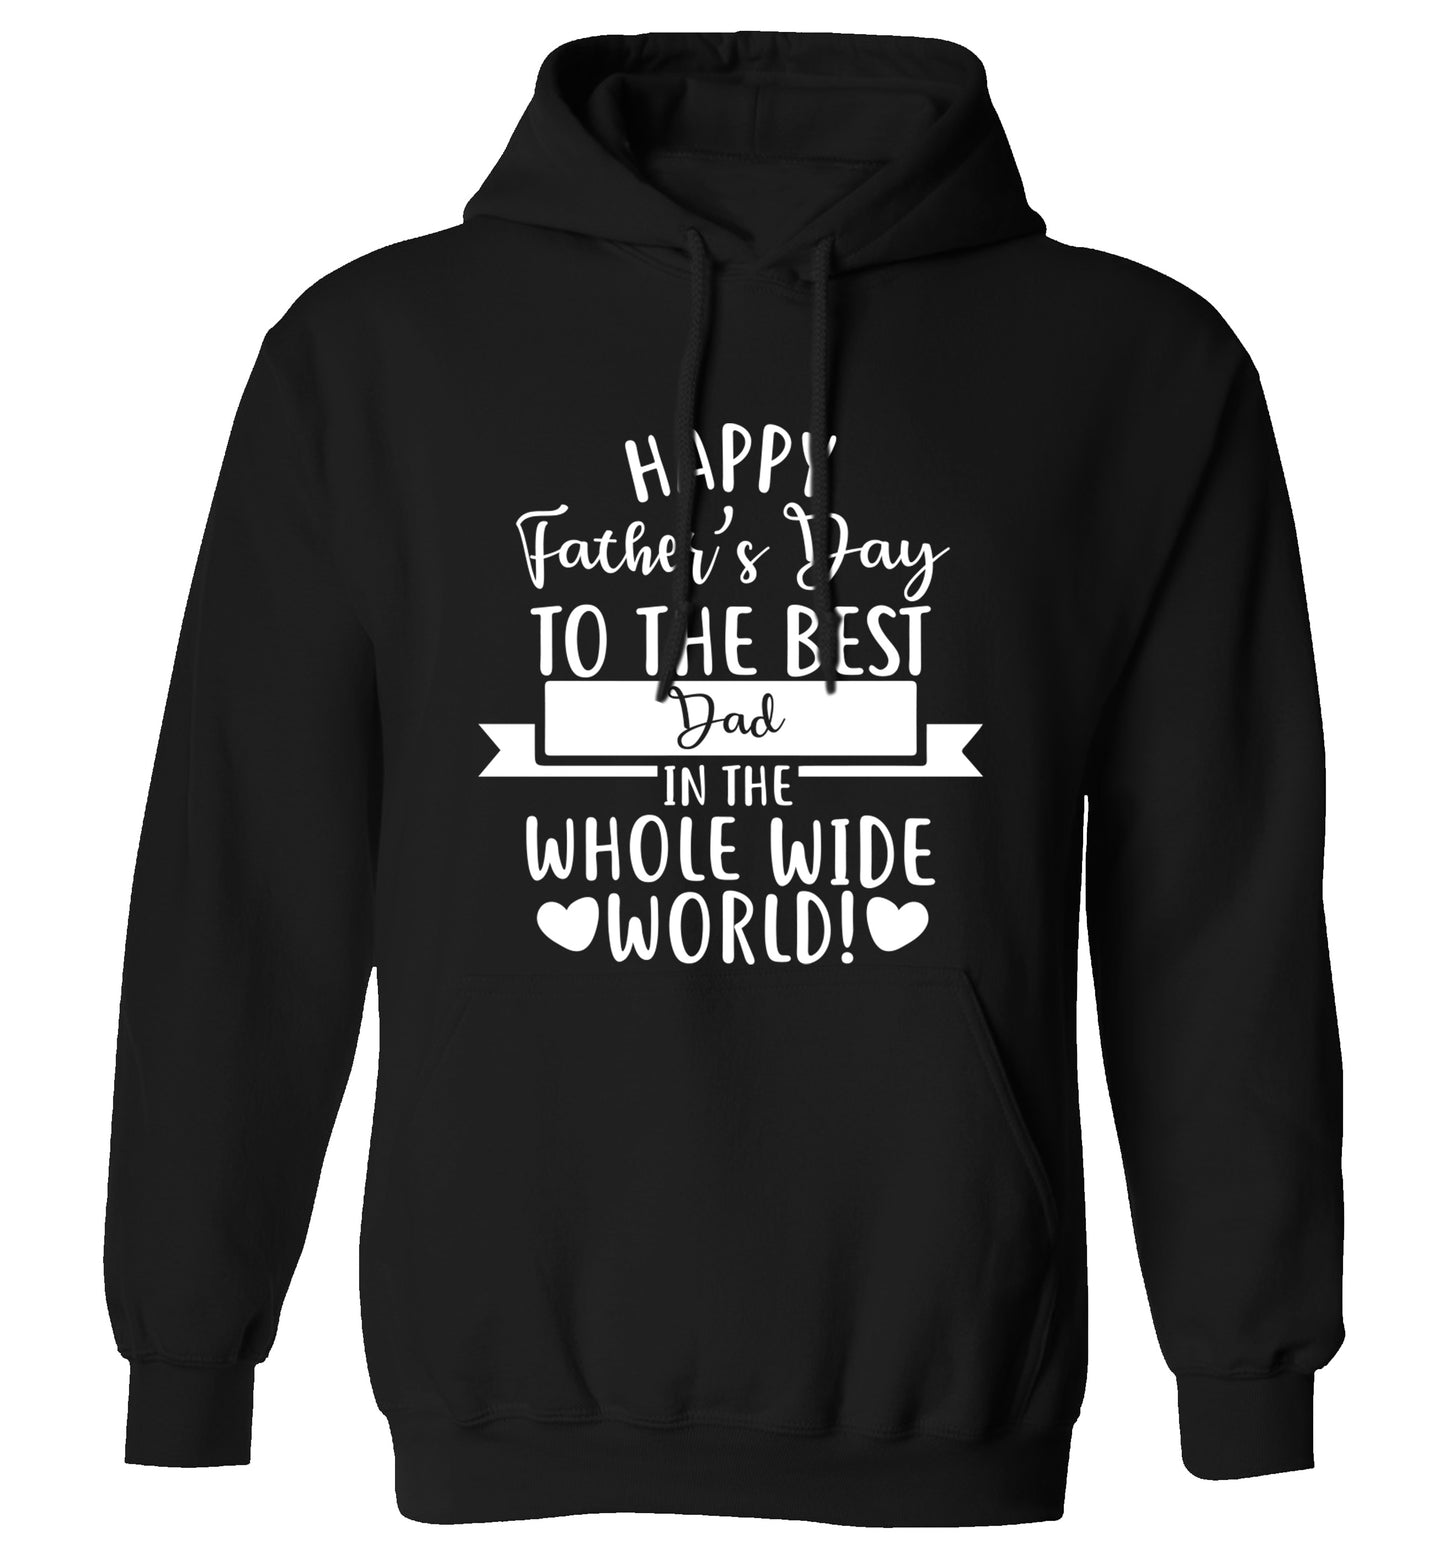 Happy Father's Day to the best father in the world! adults unisex black hoodie 2XL